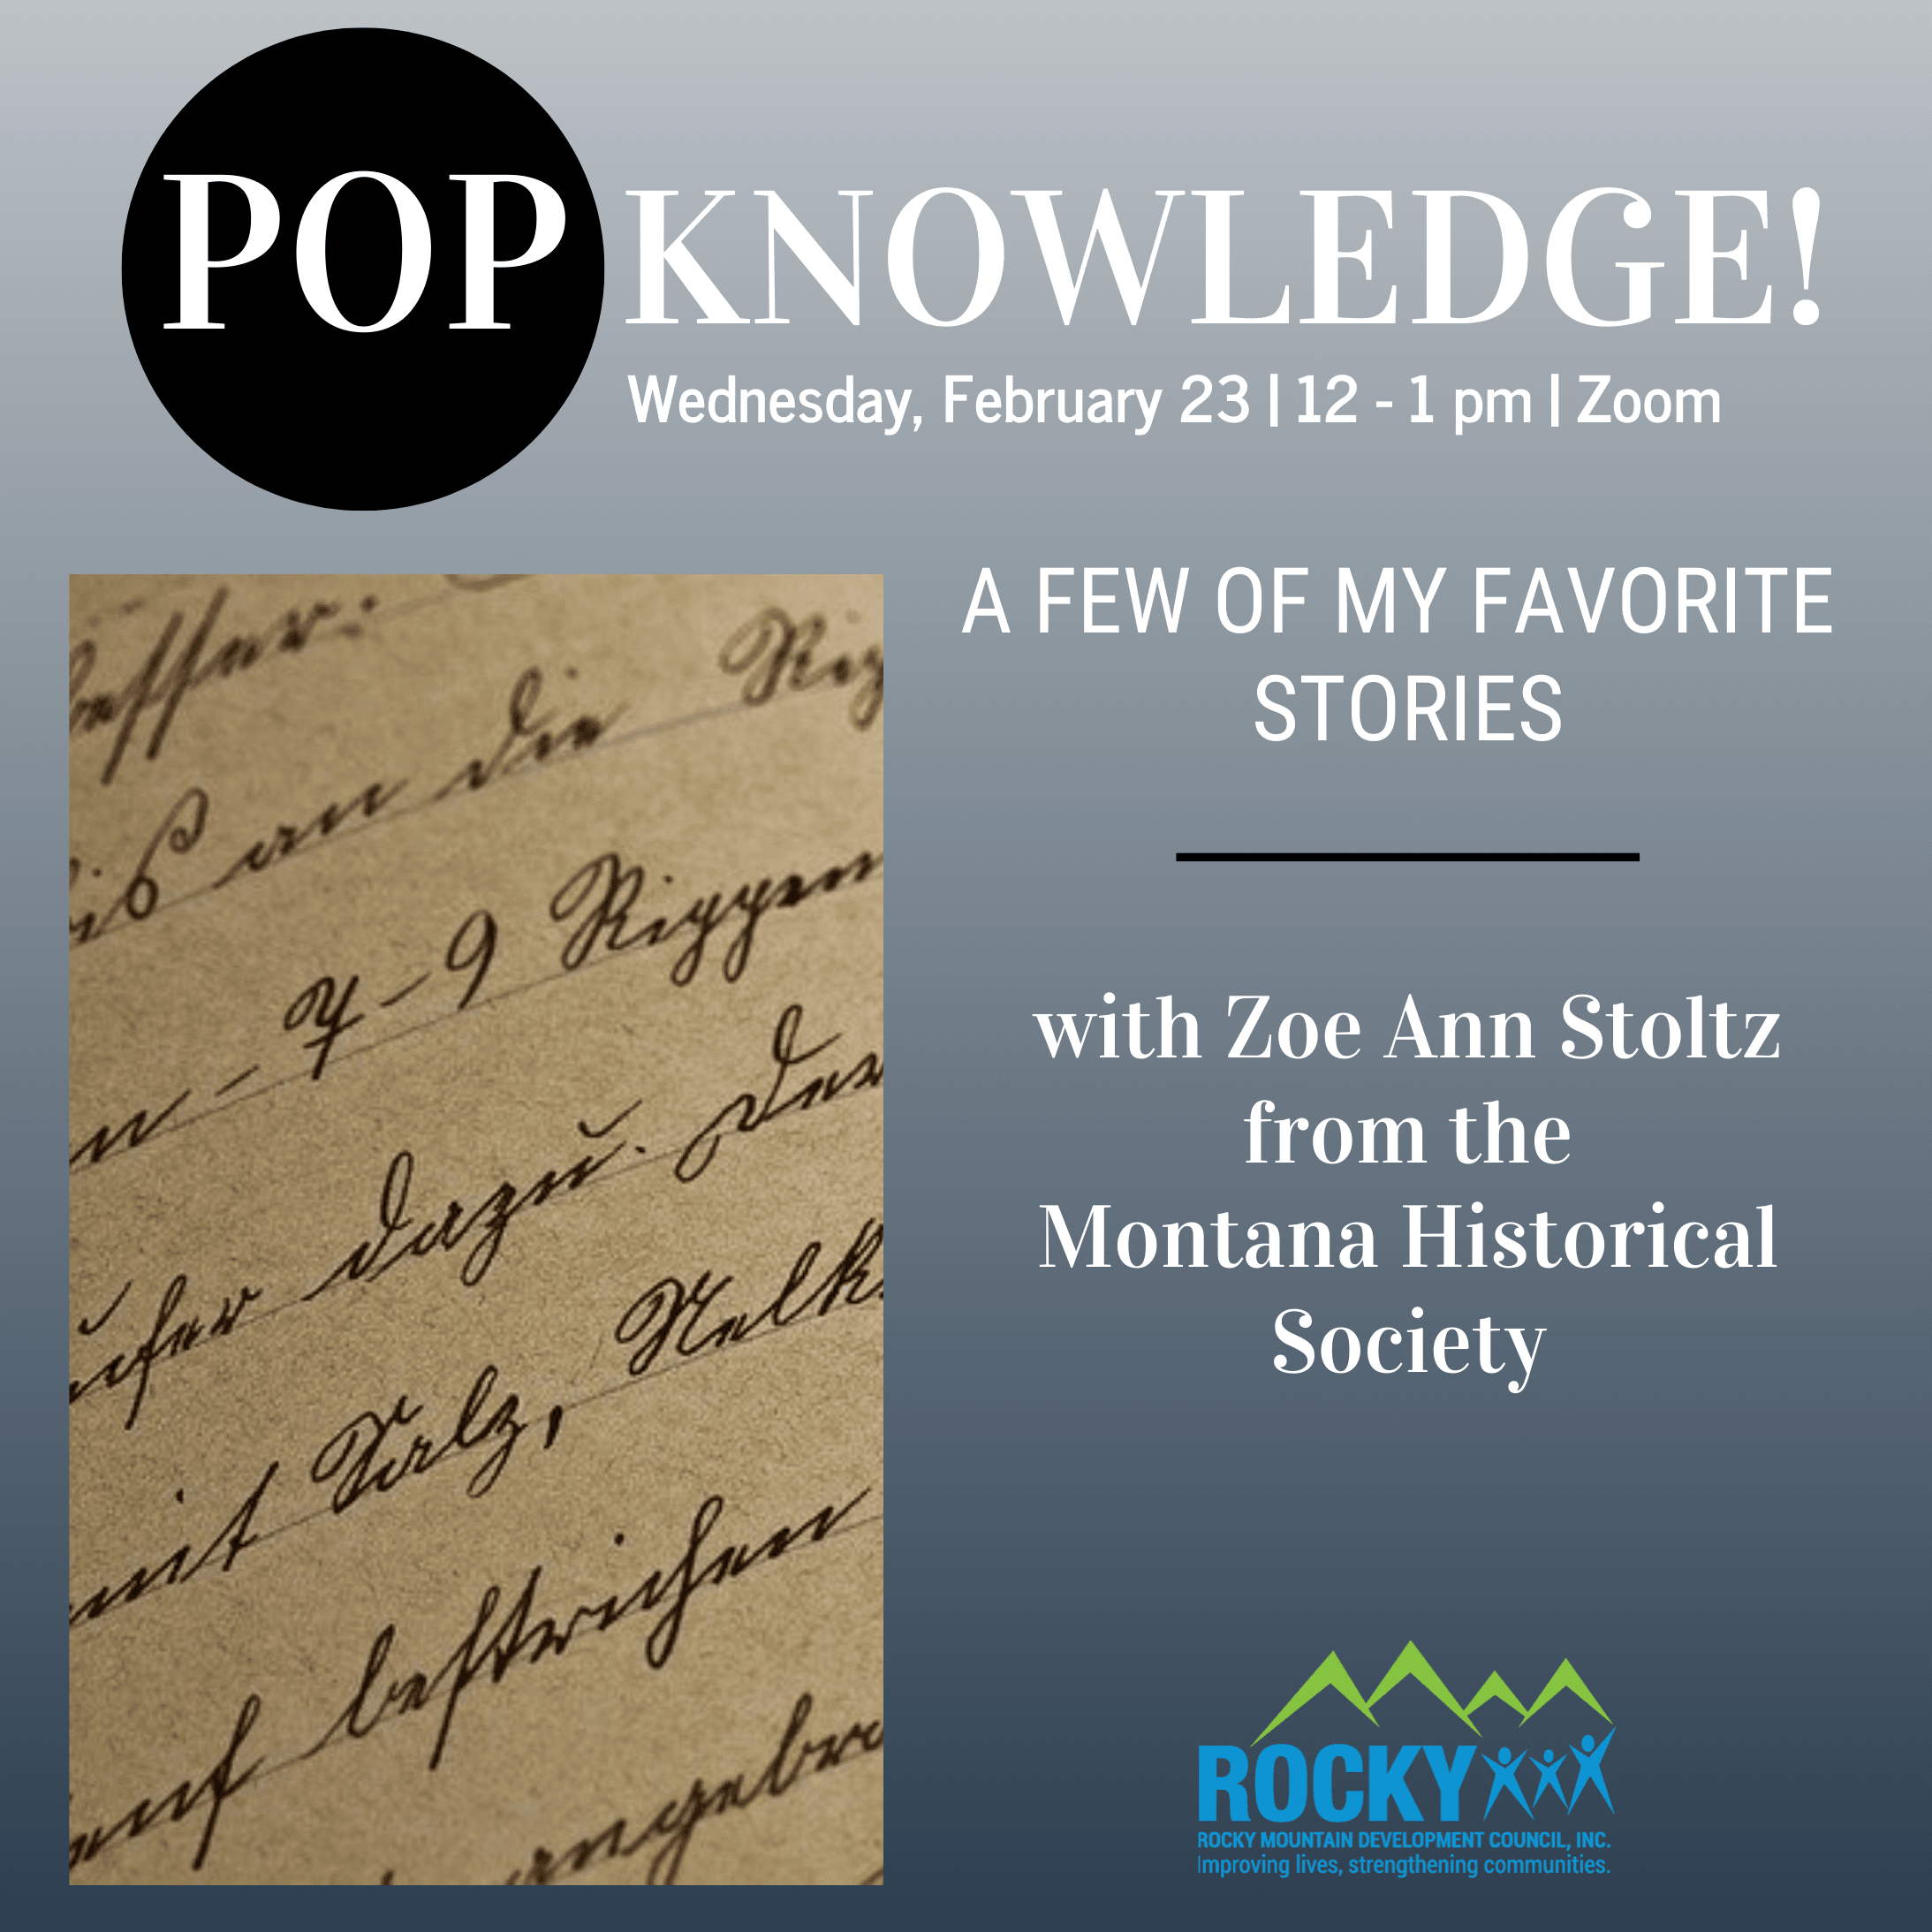 Join us for a PopKnowledge! session with Zoe Ann from the Montana Historical Society as we discuss some of our favorite tidbits of Montana History!